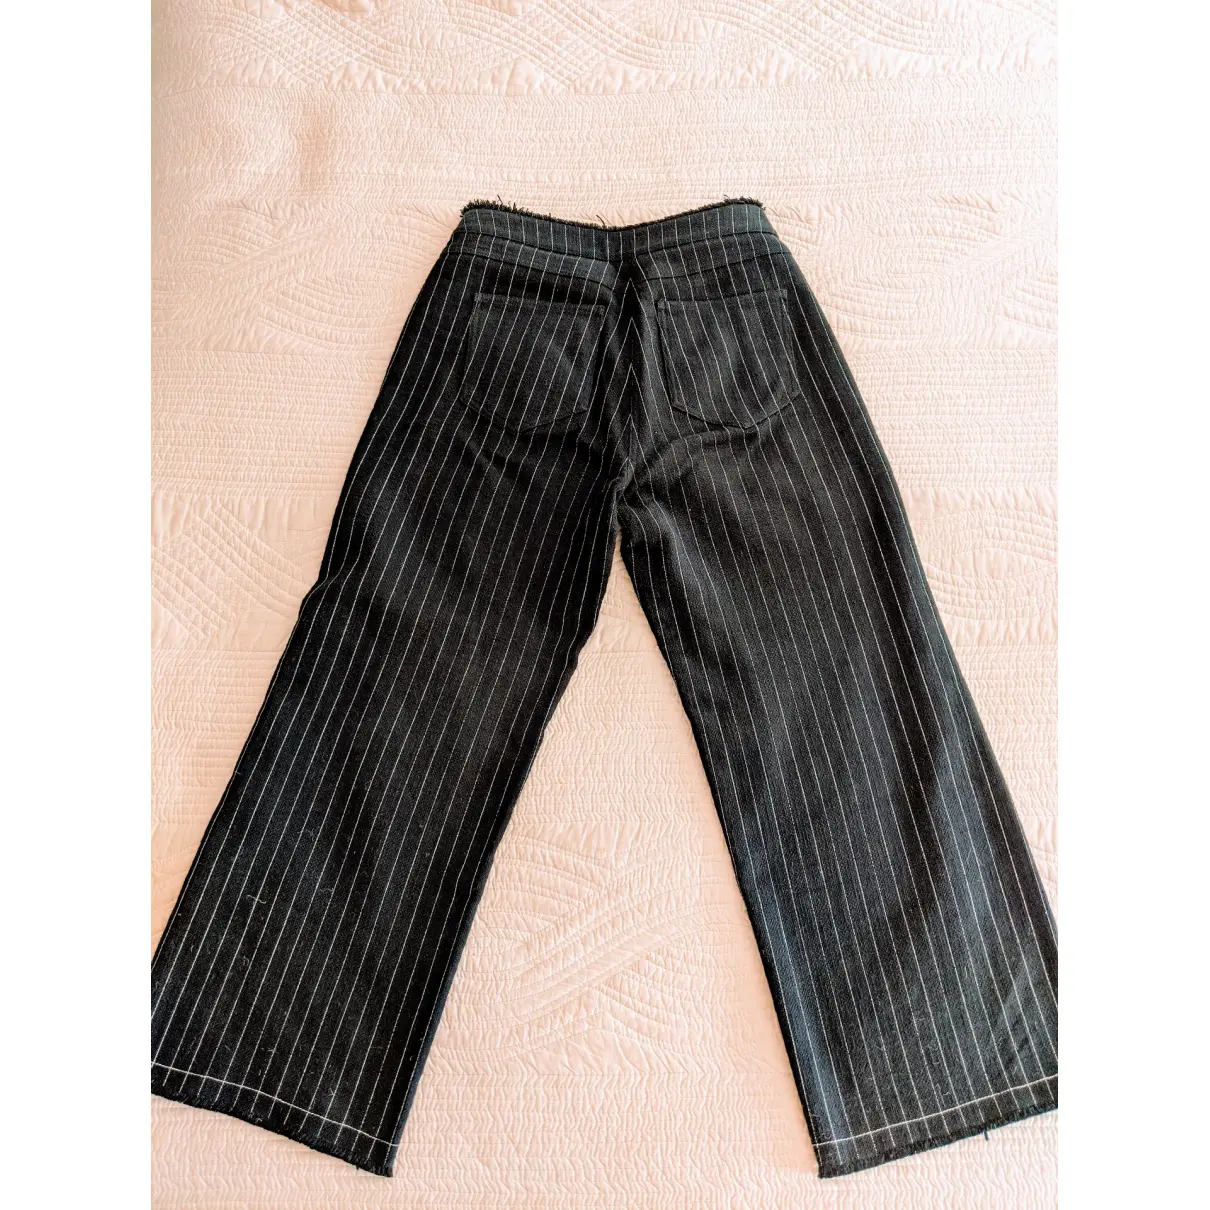 Buy T by Alexander Wang Straight pants online